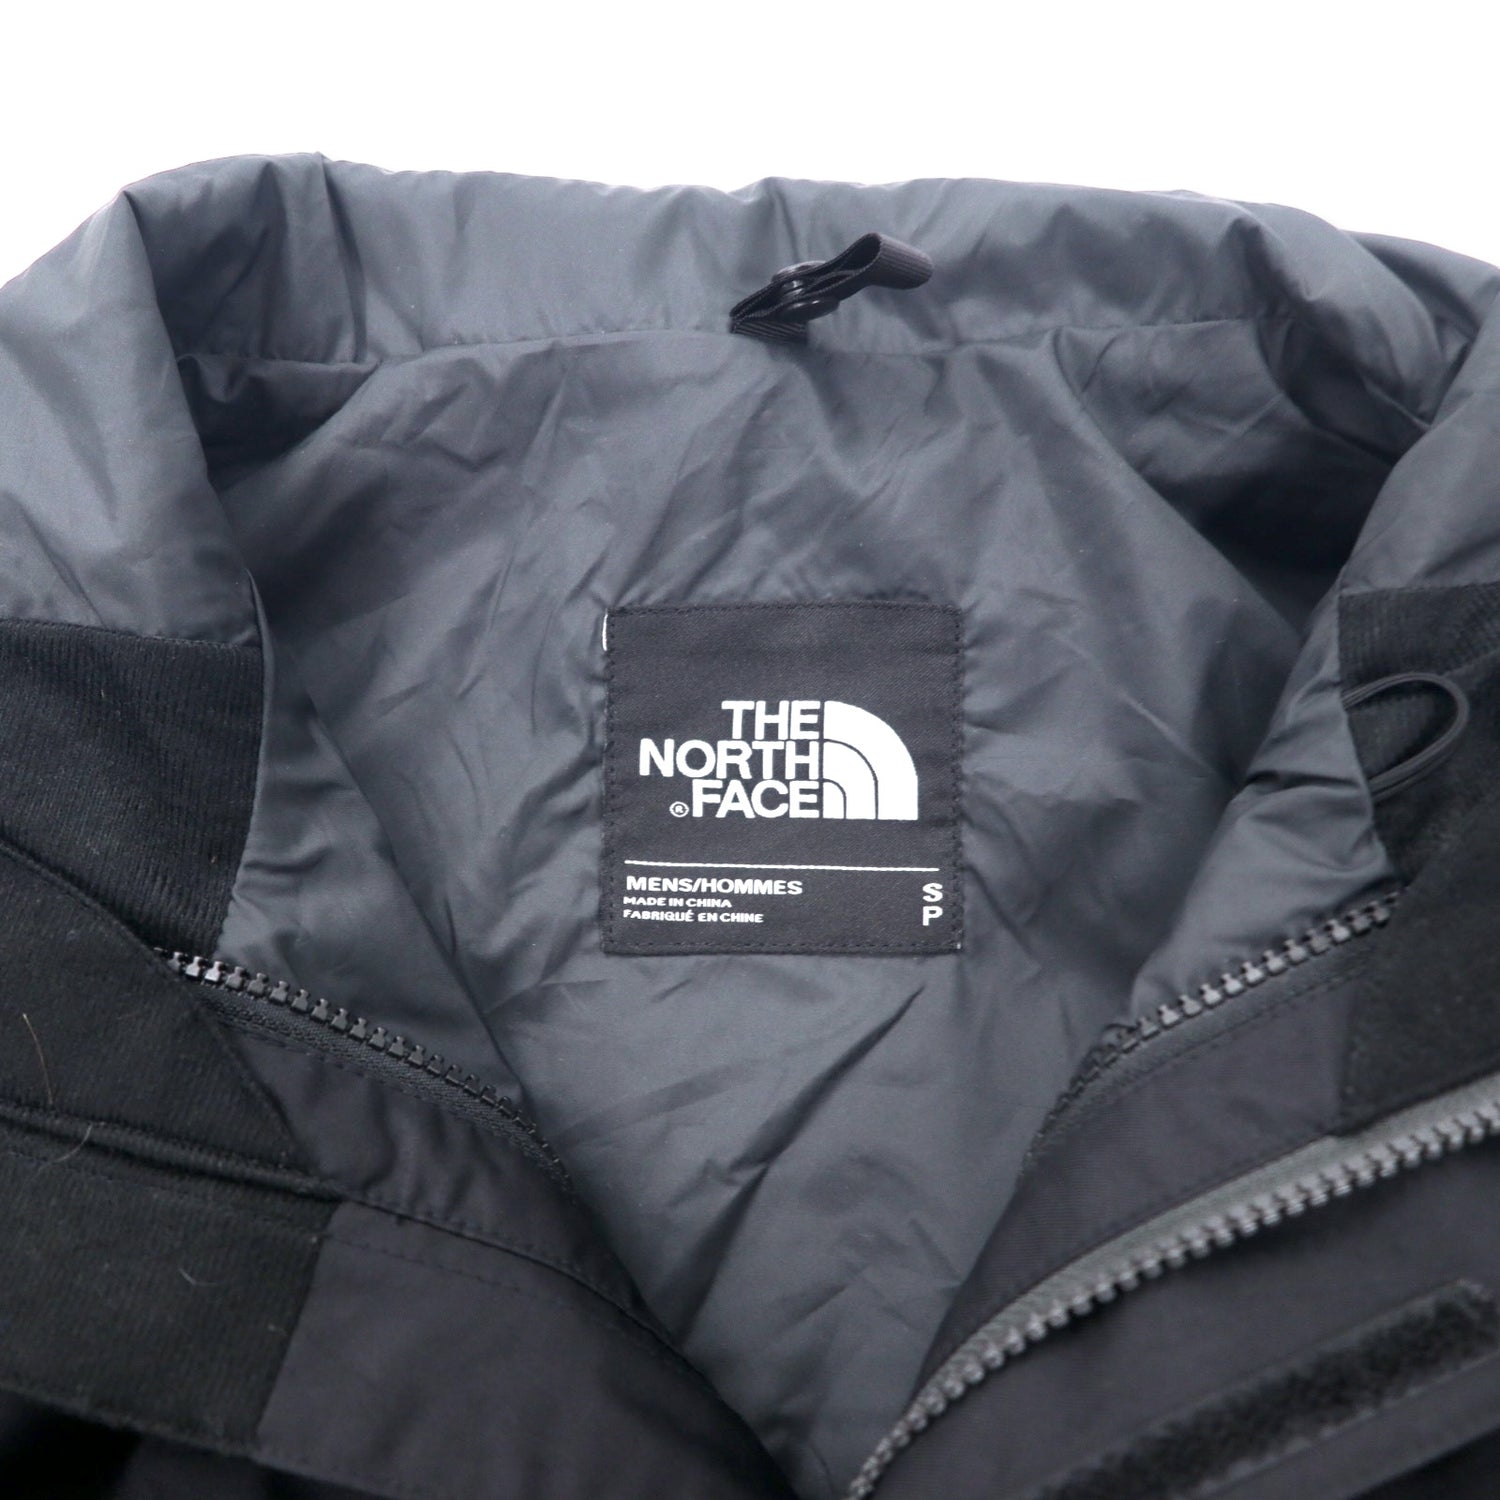 THE NORTH FACE Mountain jacket S Black polyester Dryvent 